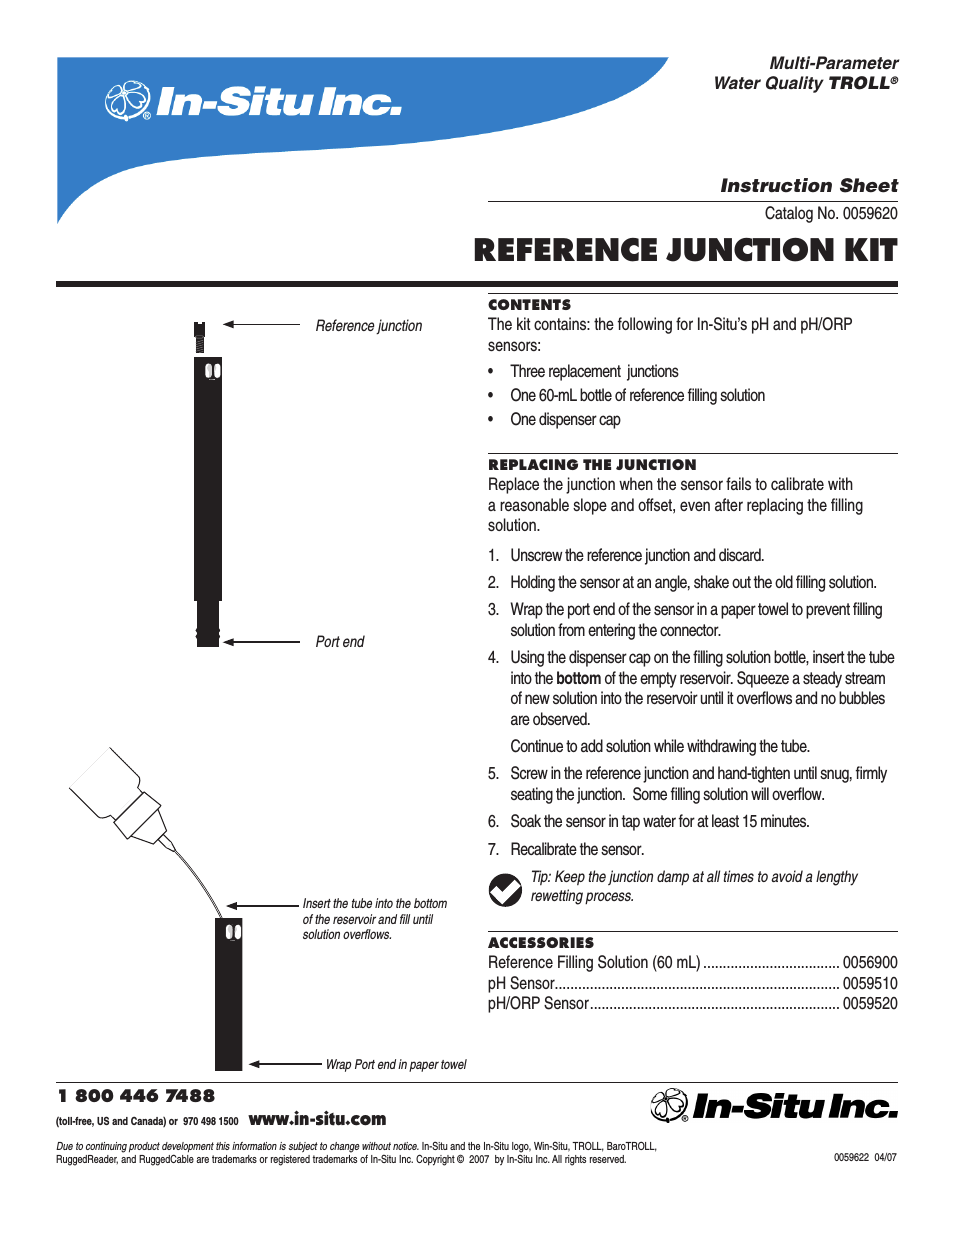 pH Sensors—Reference Junction Replacement Kit